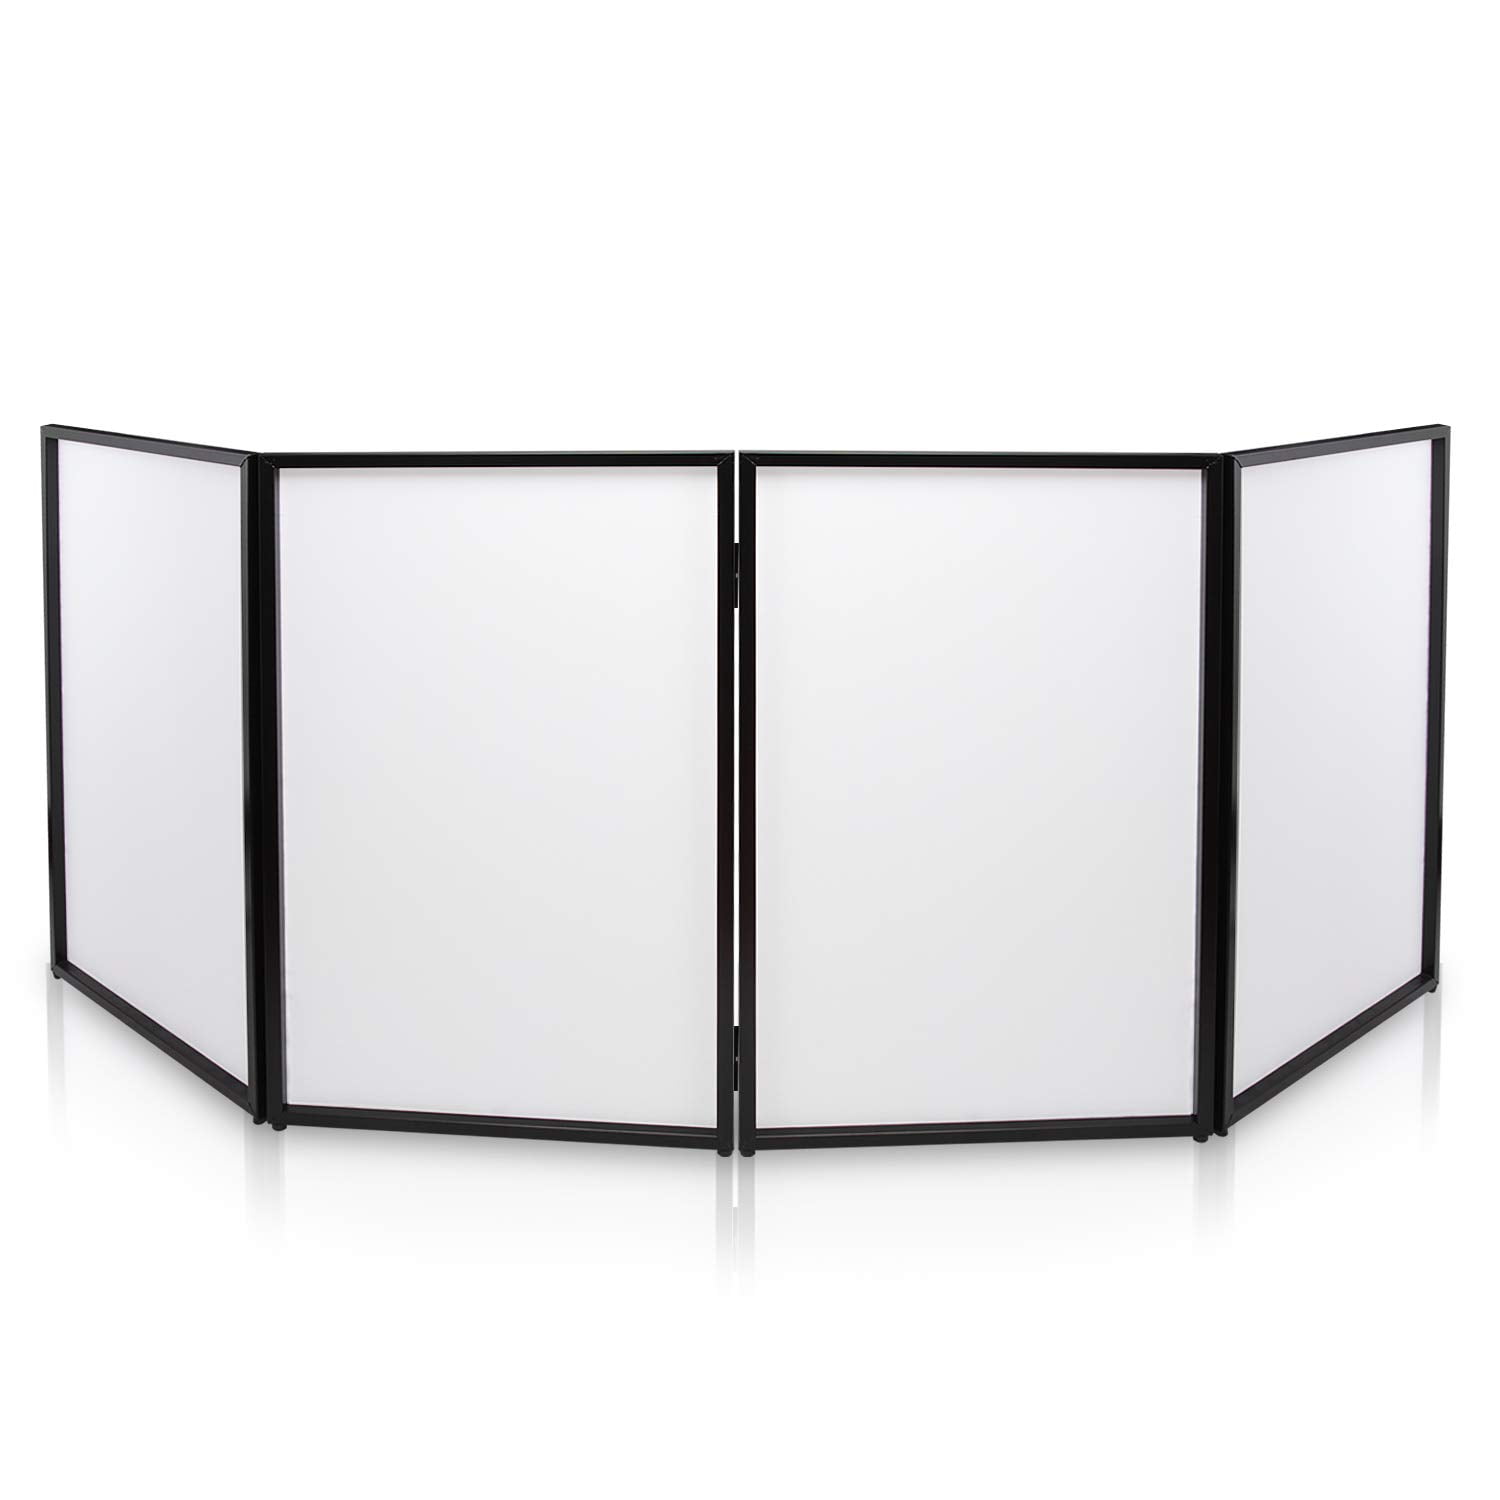 Portable Event Facade Front Board Video Light Projector Display Scrim Panel with Folding Steel Frame Stand Renewed 48x24.2x46 White Pyle DJ Booth Foldable Cover Screen PDJFAC12 Stretchable Material